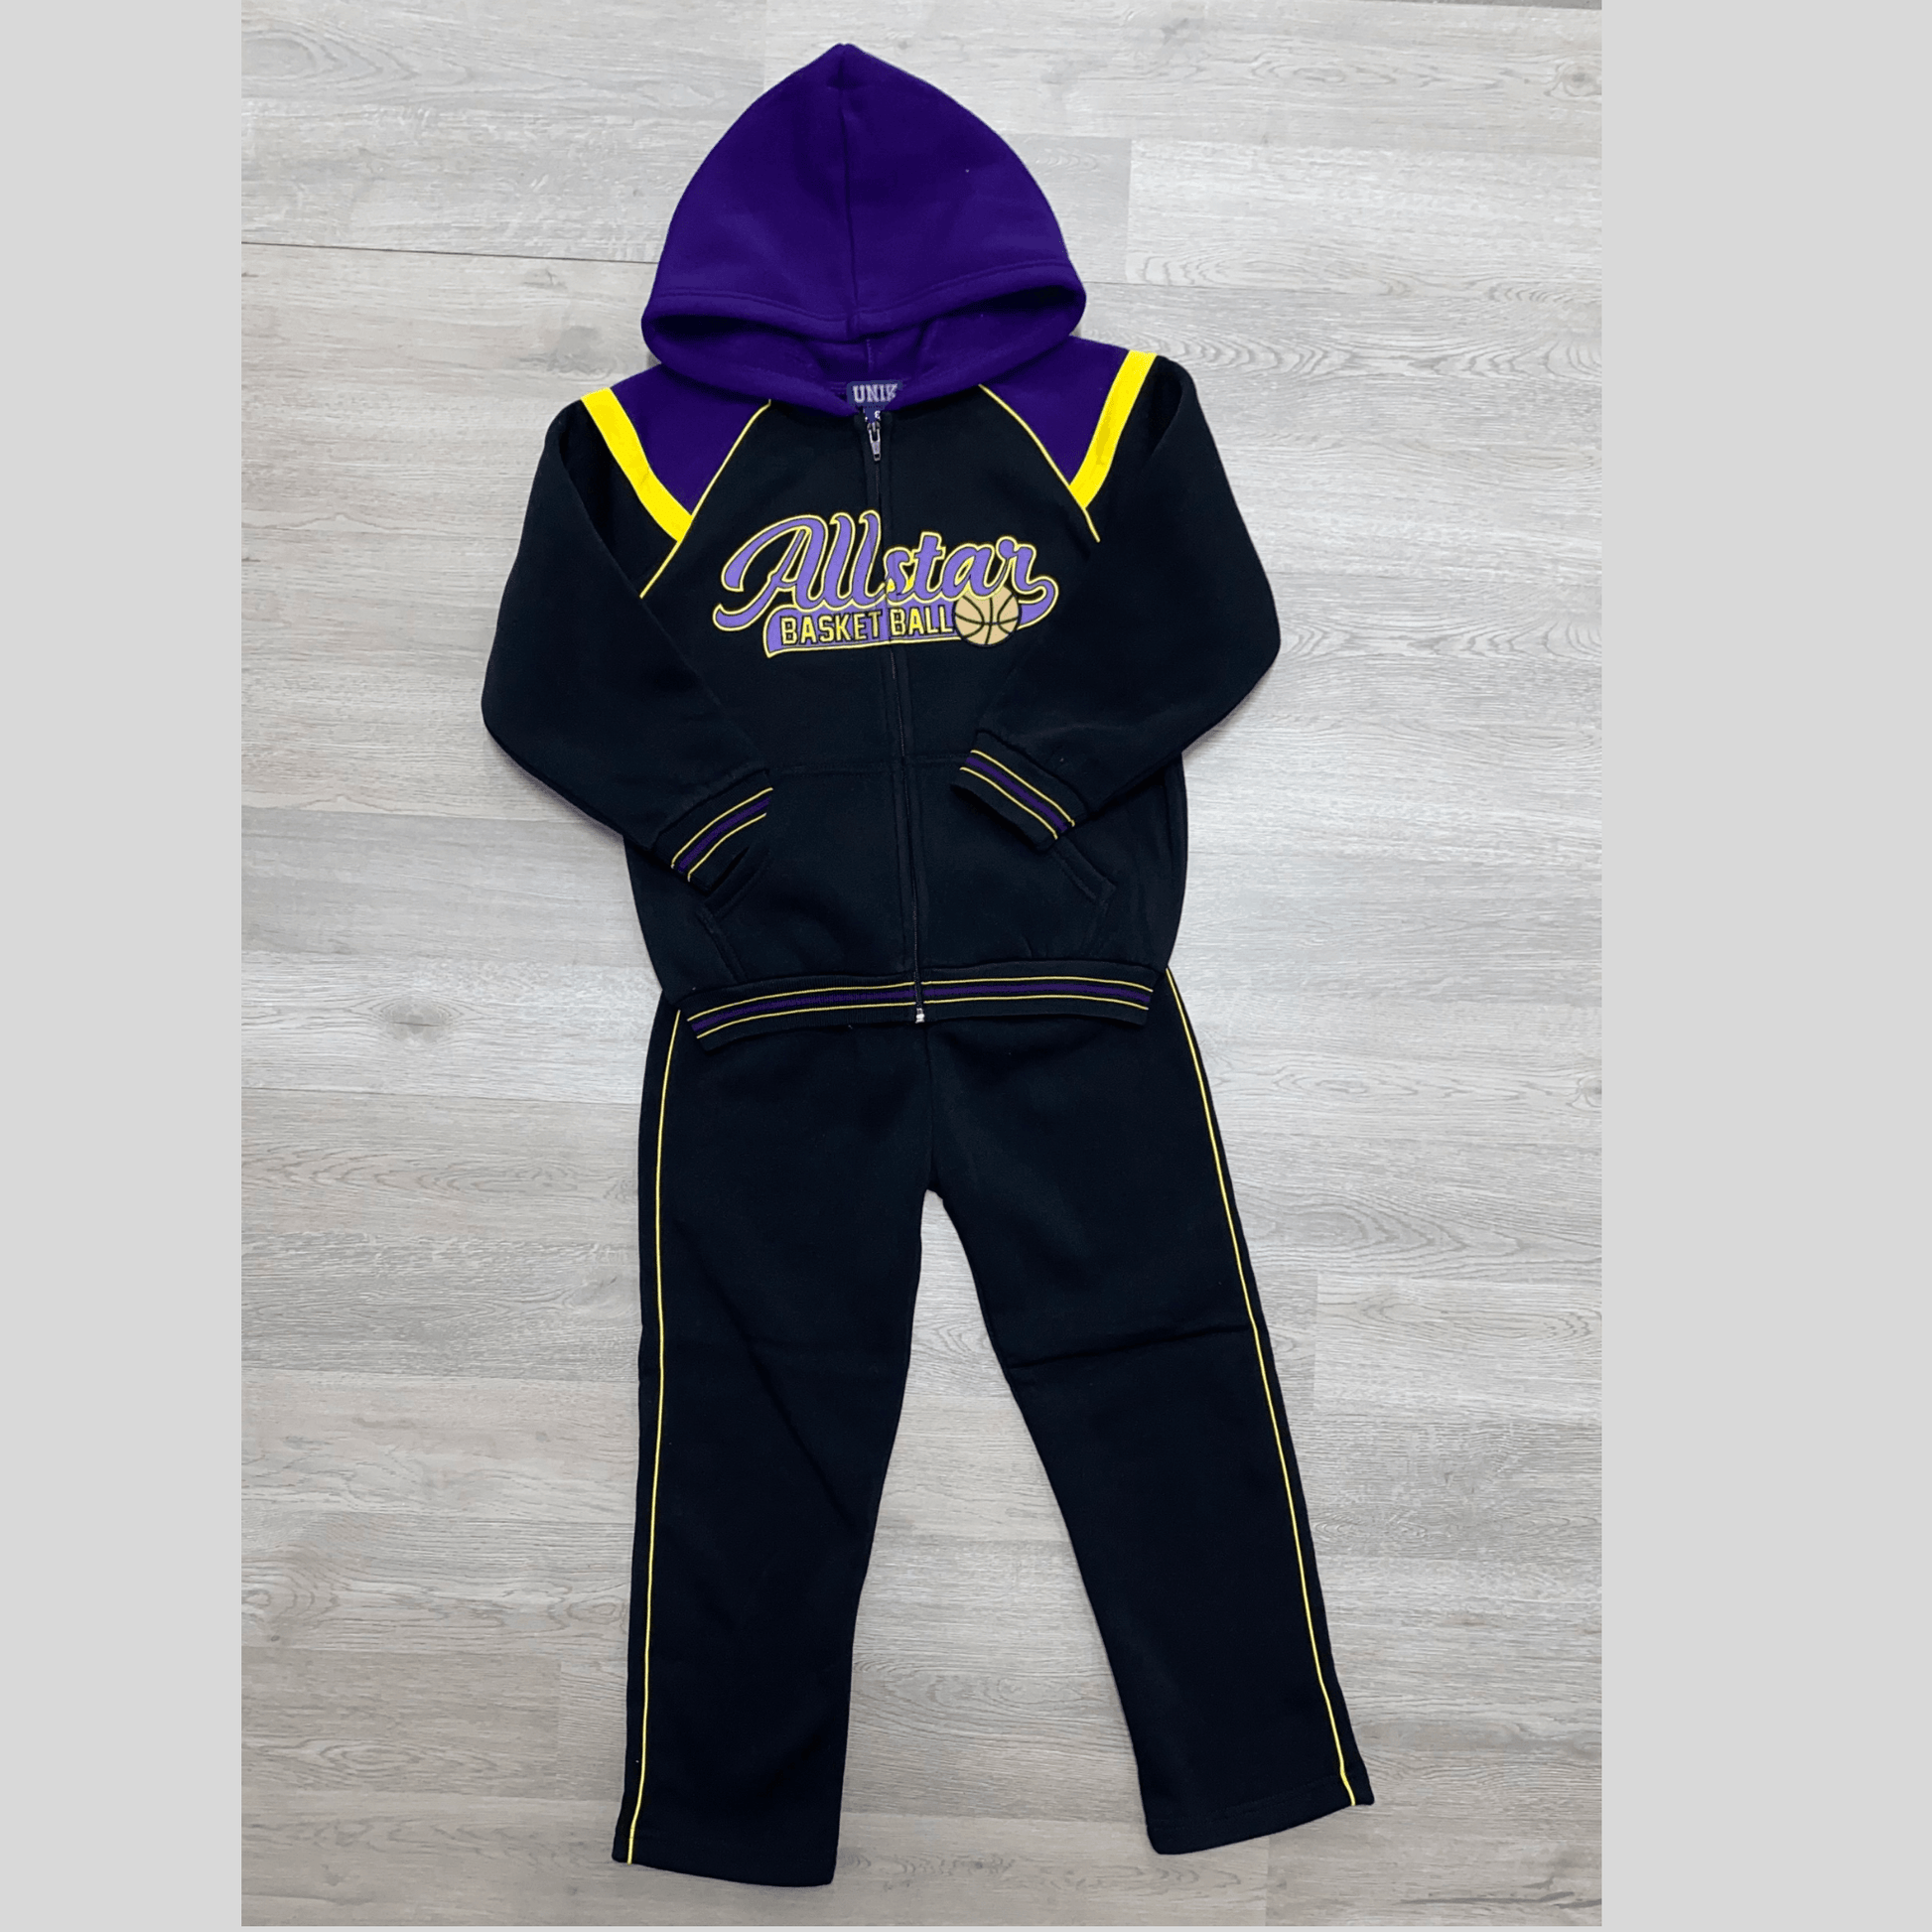 Keep your All-Star feeling and looking like an All-Star in this warm fleece sweat suit.  This black sweat suit features the words "All-Star" and a basketball embroidered on the front.  This sweat suit is perfect for the little baller in your life.